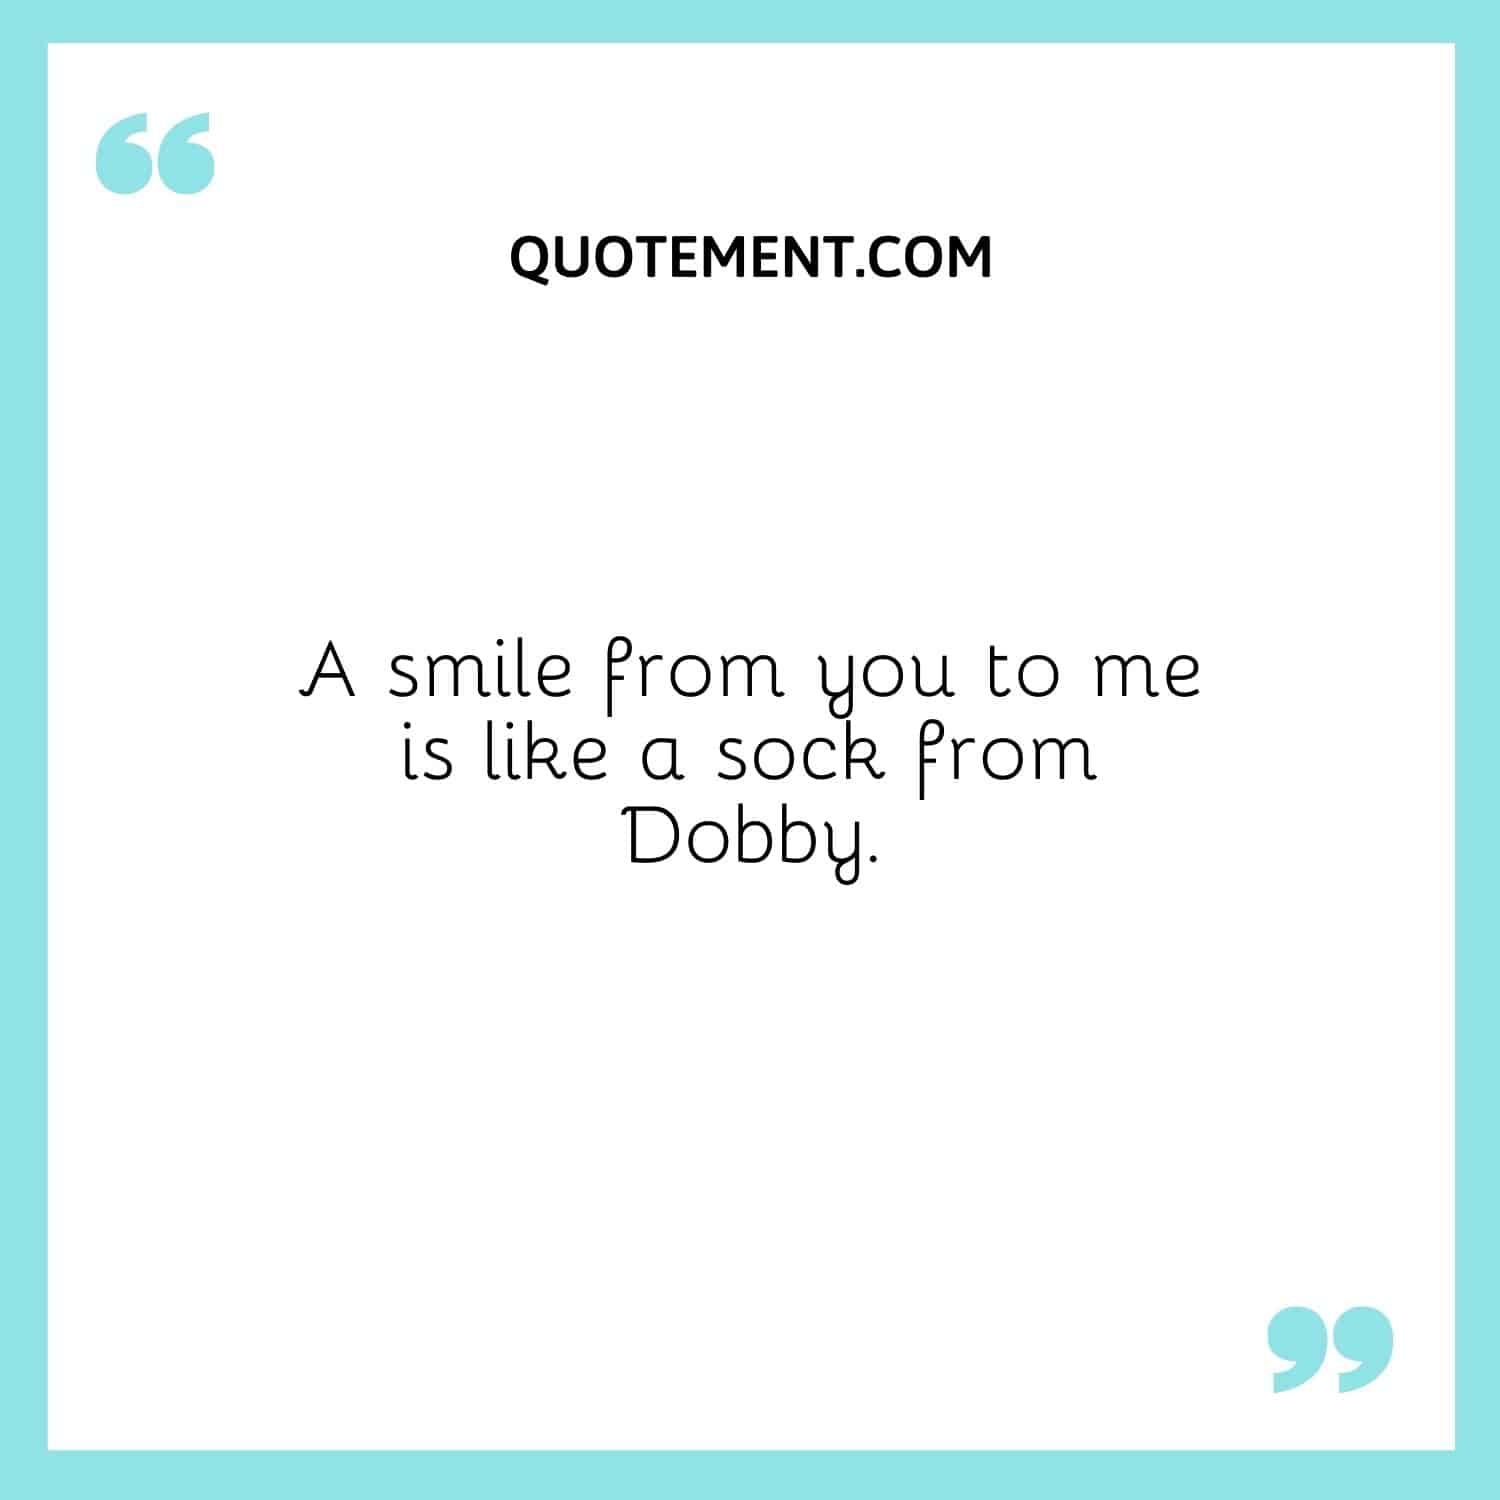 A smile from you to me is like a sock from Dobby